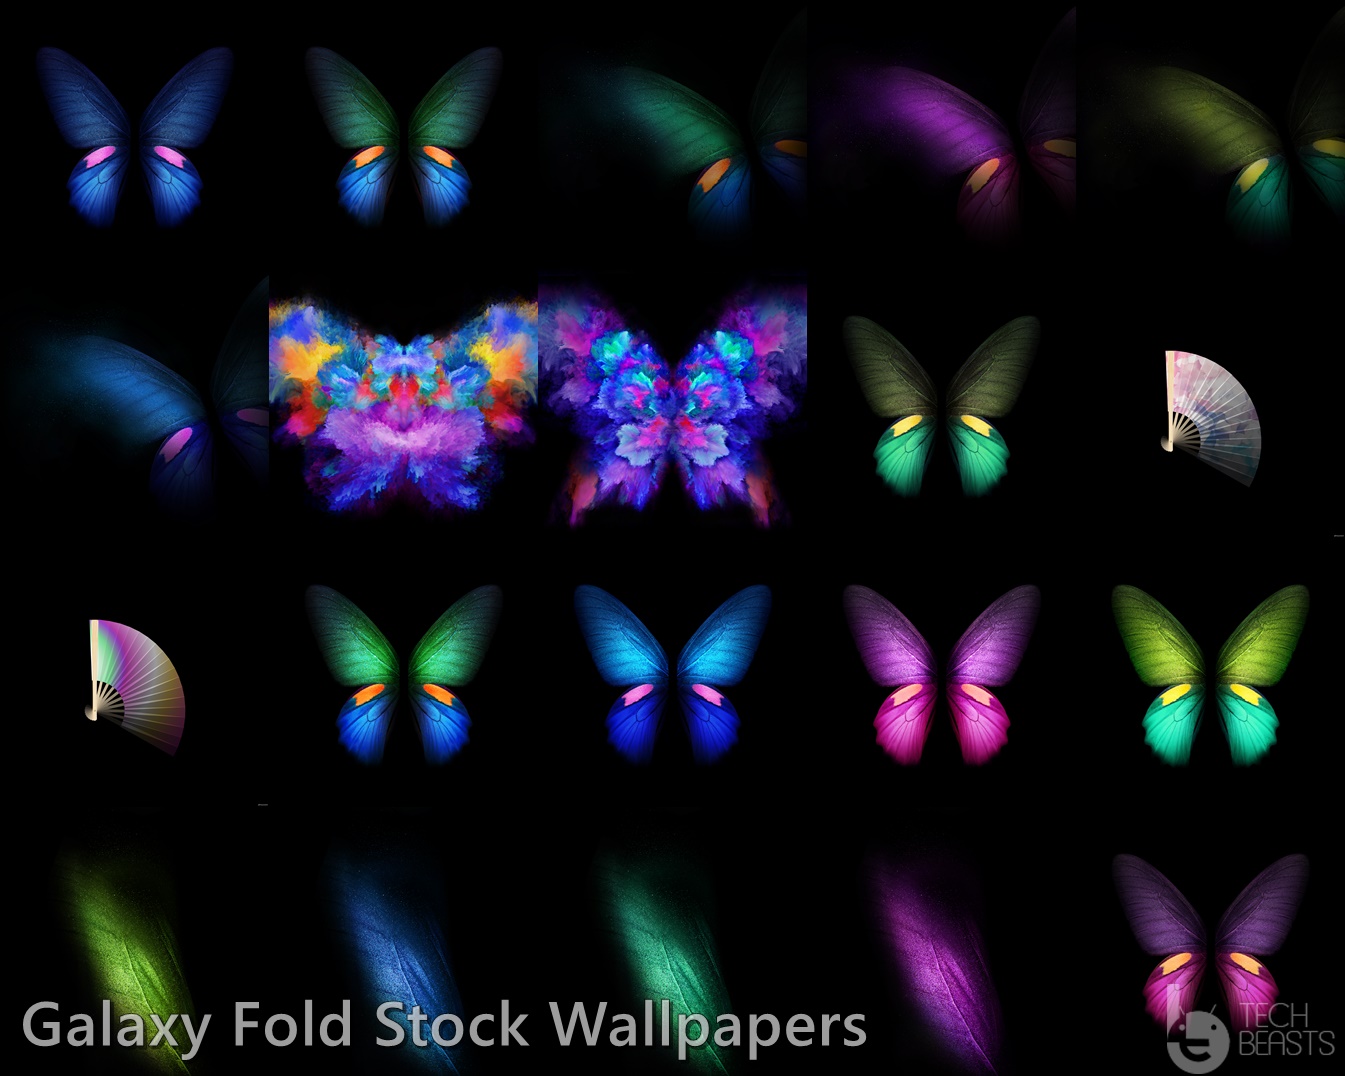 Download Samsung Galaxy Fold Stock Wallpapers | TechBeasts